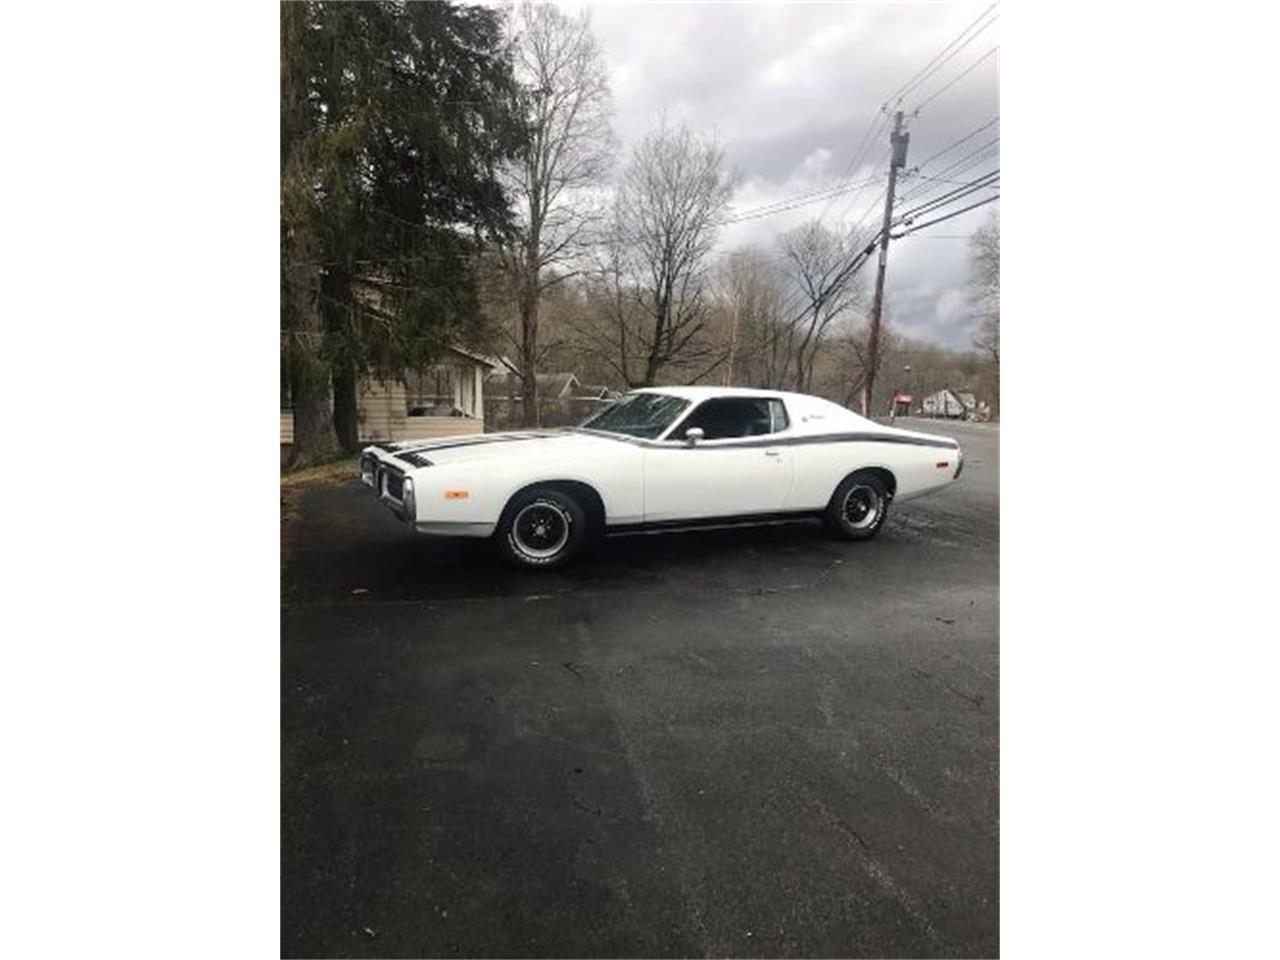 For Sale: 1972 Dodge Charger in Cadillac, Michigan for sale in Cadillac, MI